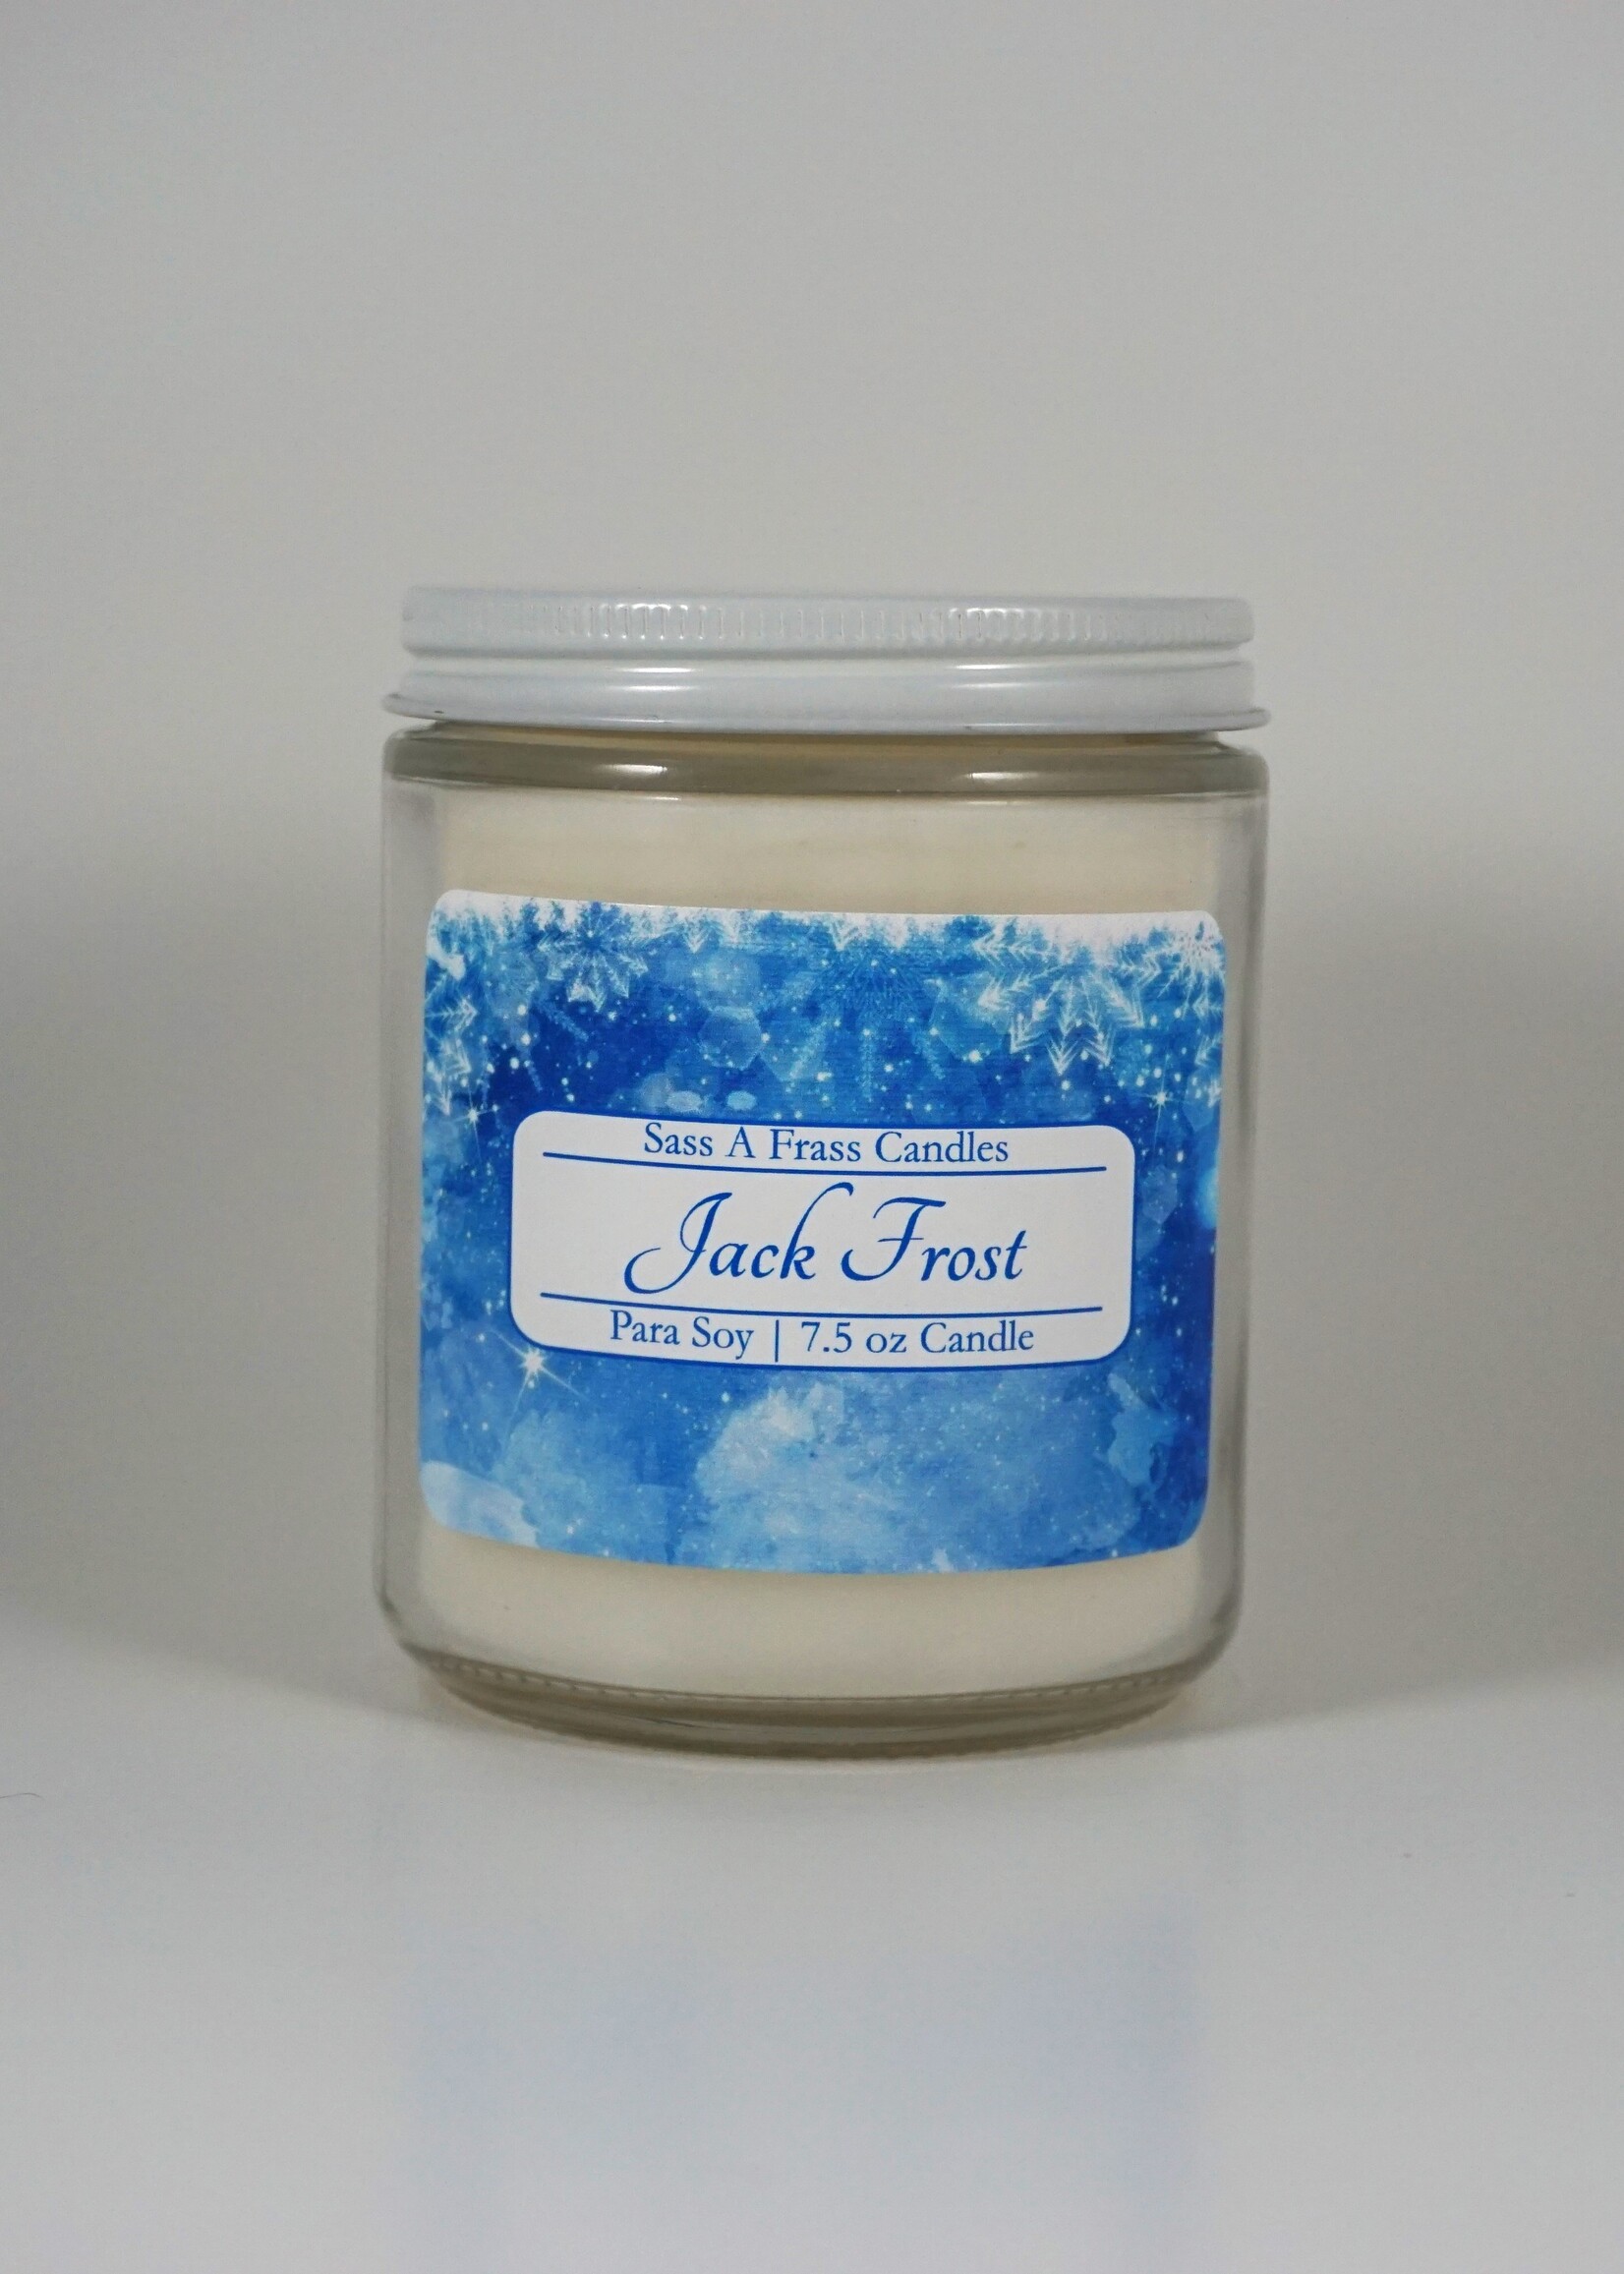 Jack Frost 7.5 oz Candle